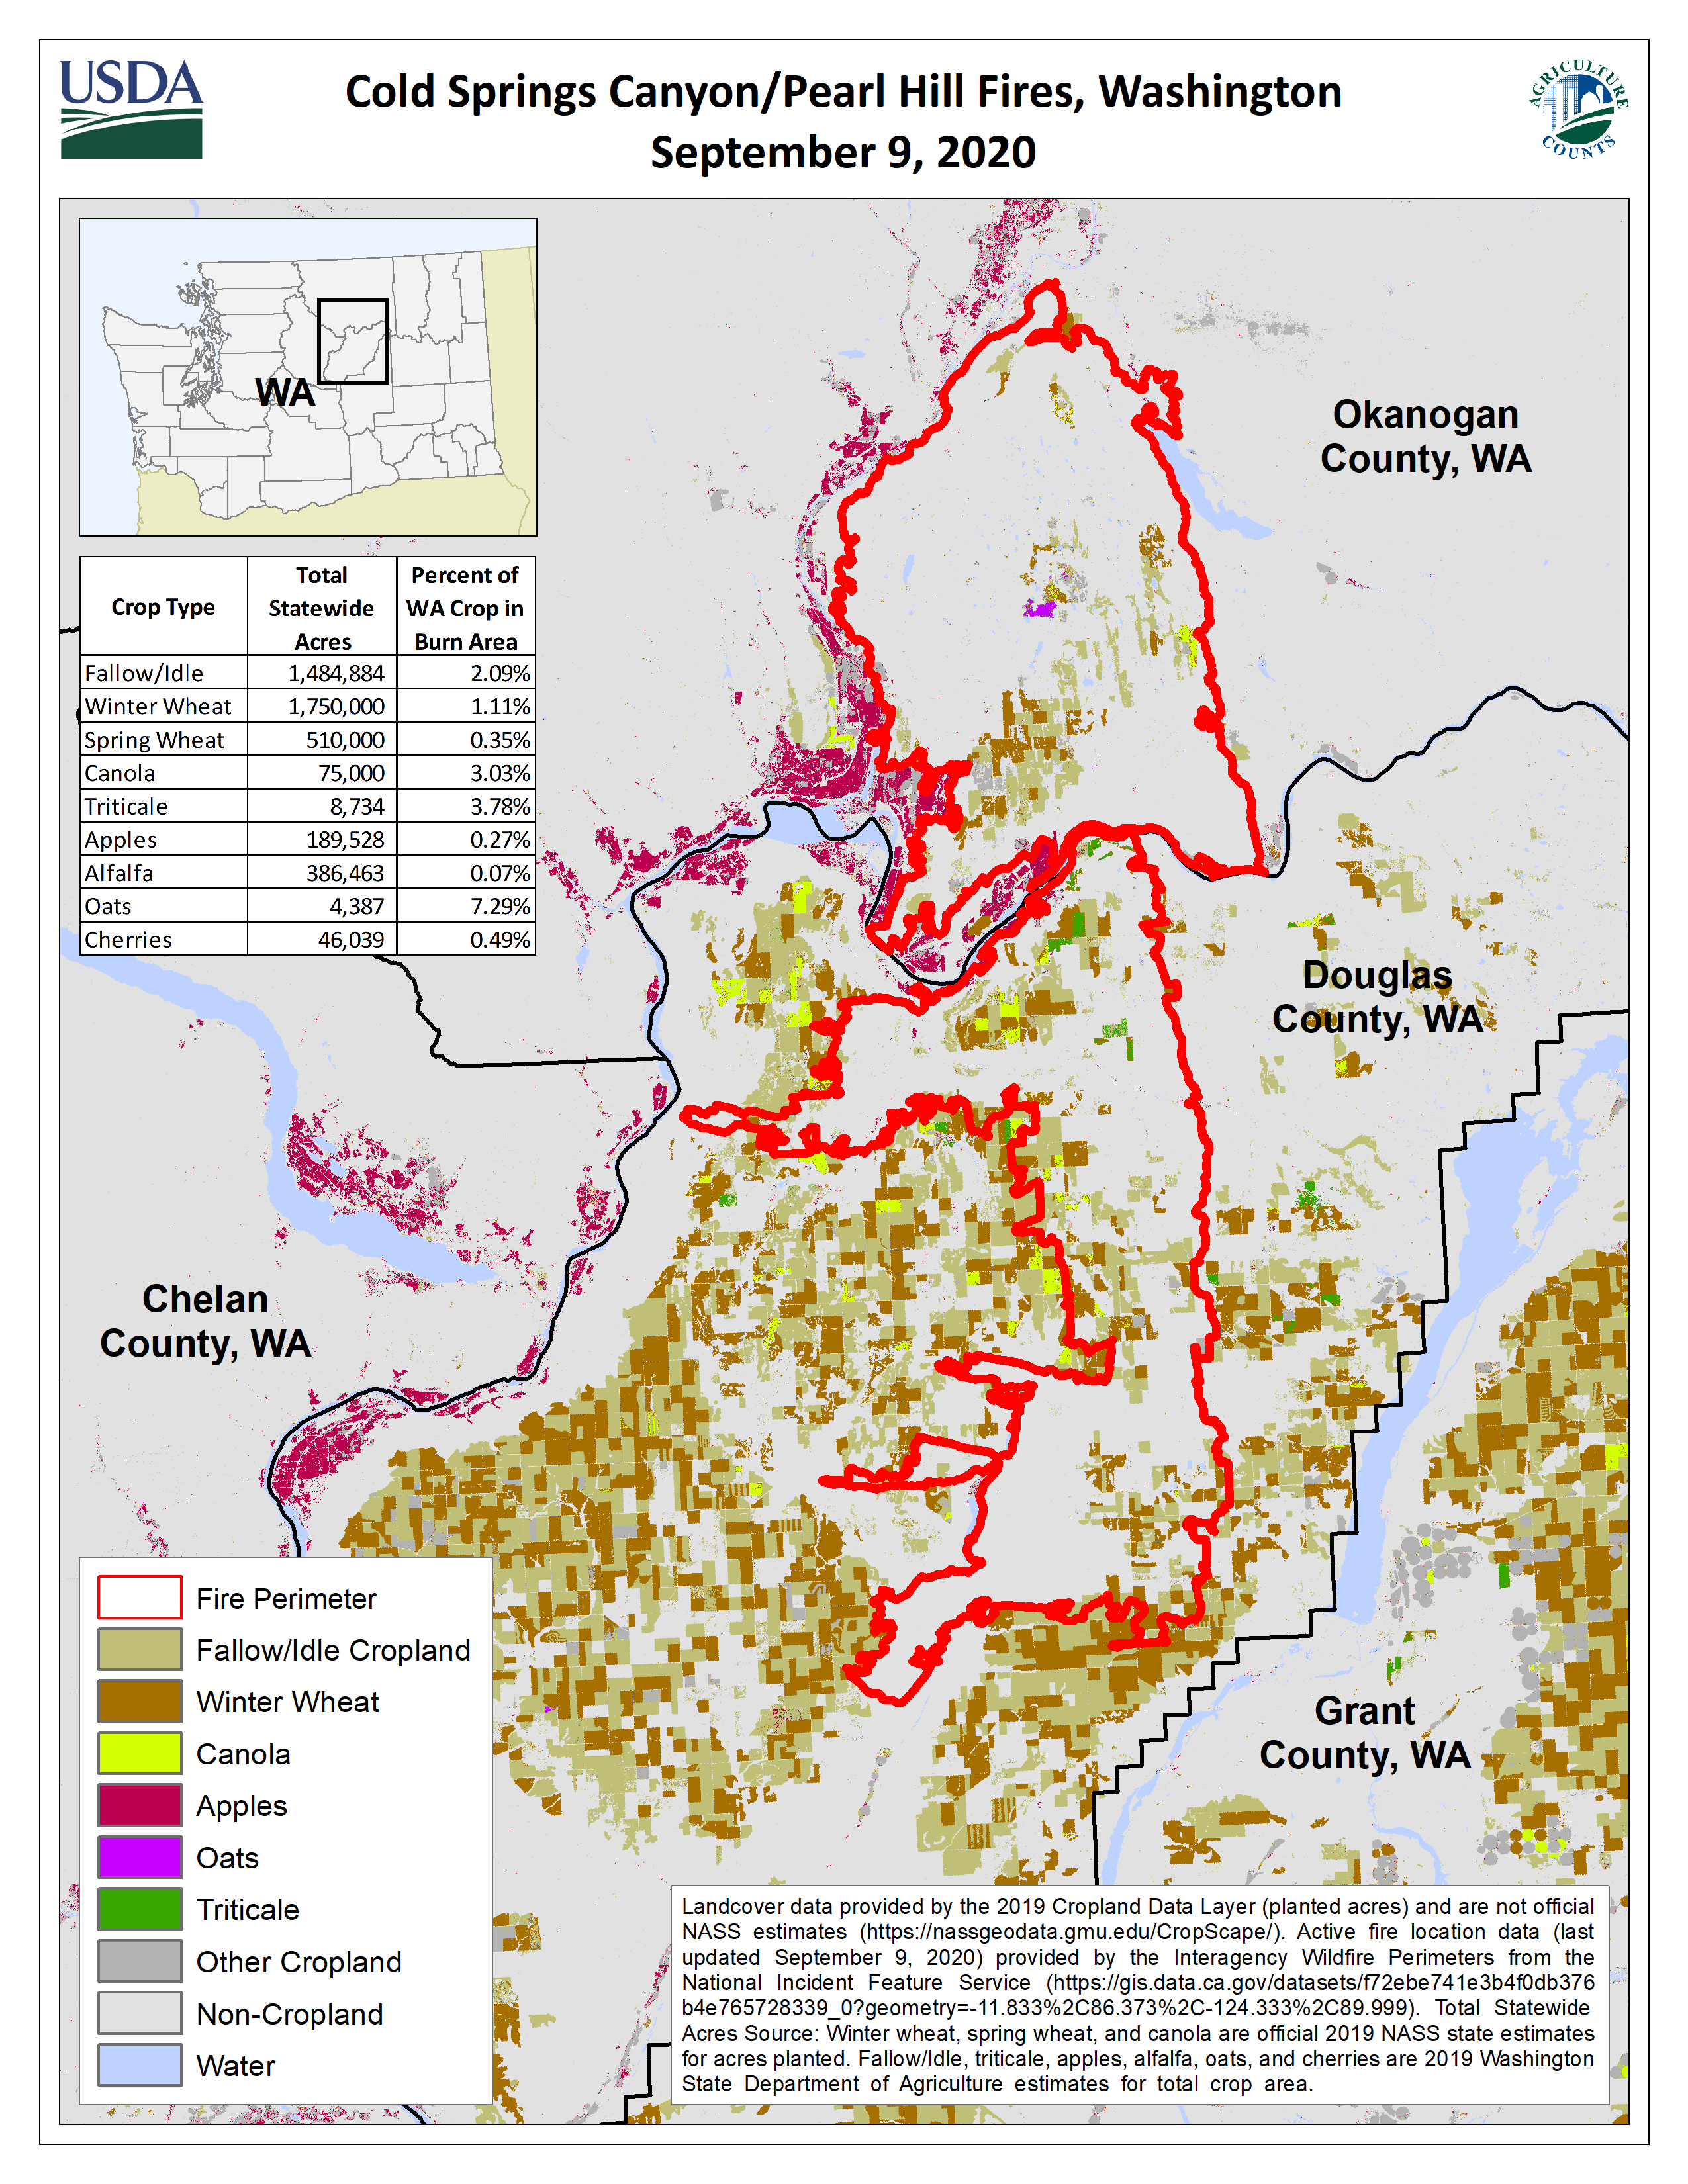 Map of Cold Springs Canyon/Pearl Hill Fires, Washington (September 2020)